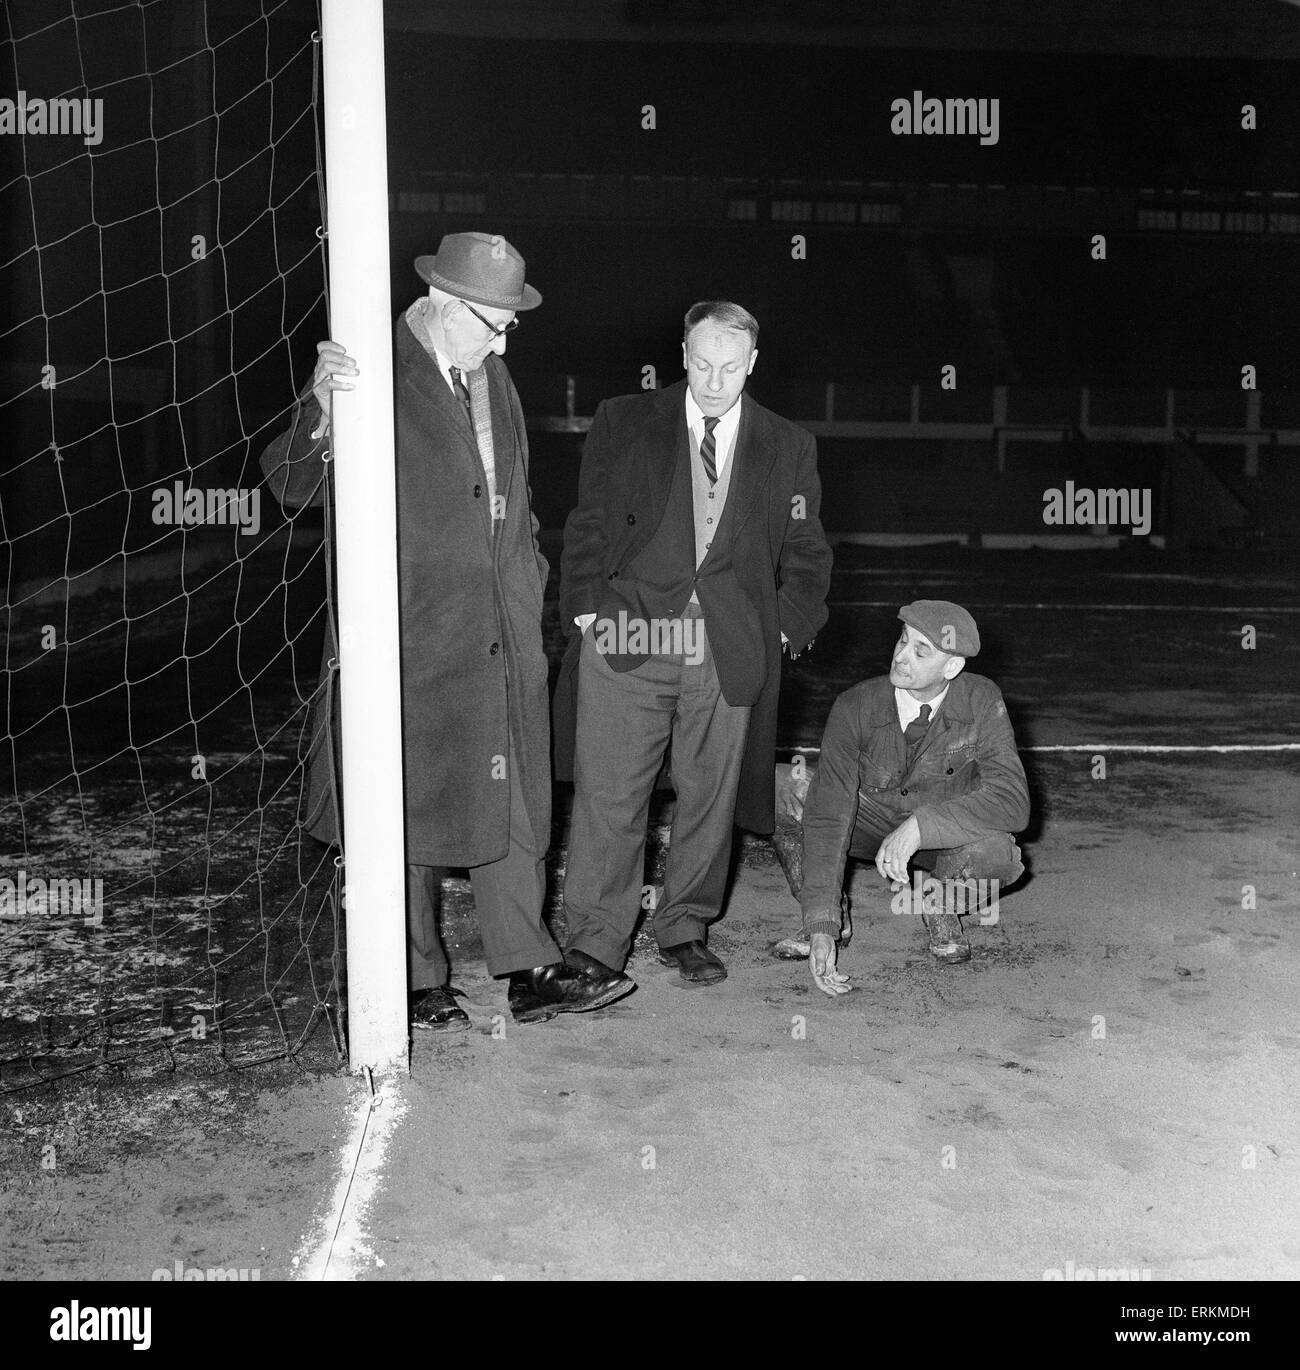 Liverpool manager Bill Shankly inspecting the Anfield pitch with chairman T V Williams and head groundsman Arthur Riley after referee  George McCabe called off the upcoming FA Cup fourth round replay match against Burnley at Anfield, only three hours before kick off, with Shankly having been assured the game was on. He criticised Harry Potts and claimed the Burnley manager 'seemed to be making it clear that he didn't want the game on' and added that he resented Potts appearance at Anfield for the pitch inspection. 11th February 1963. Stock Photo